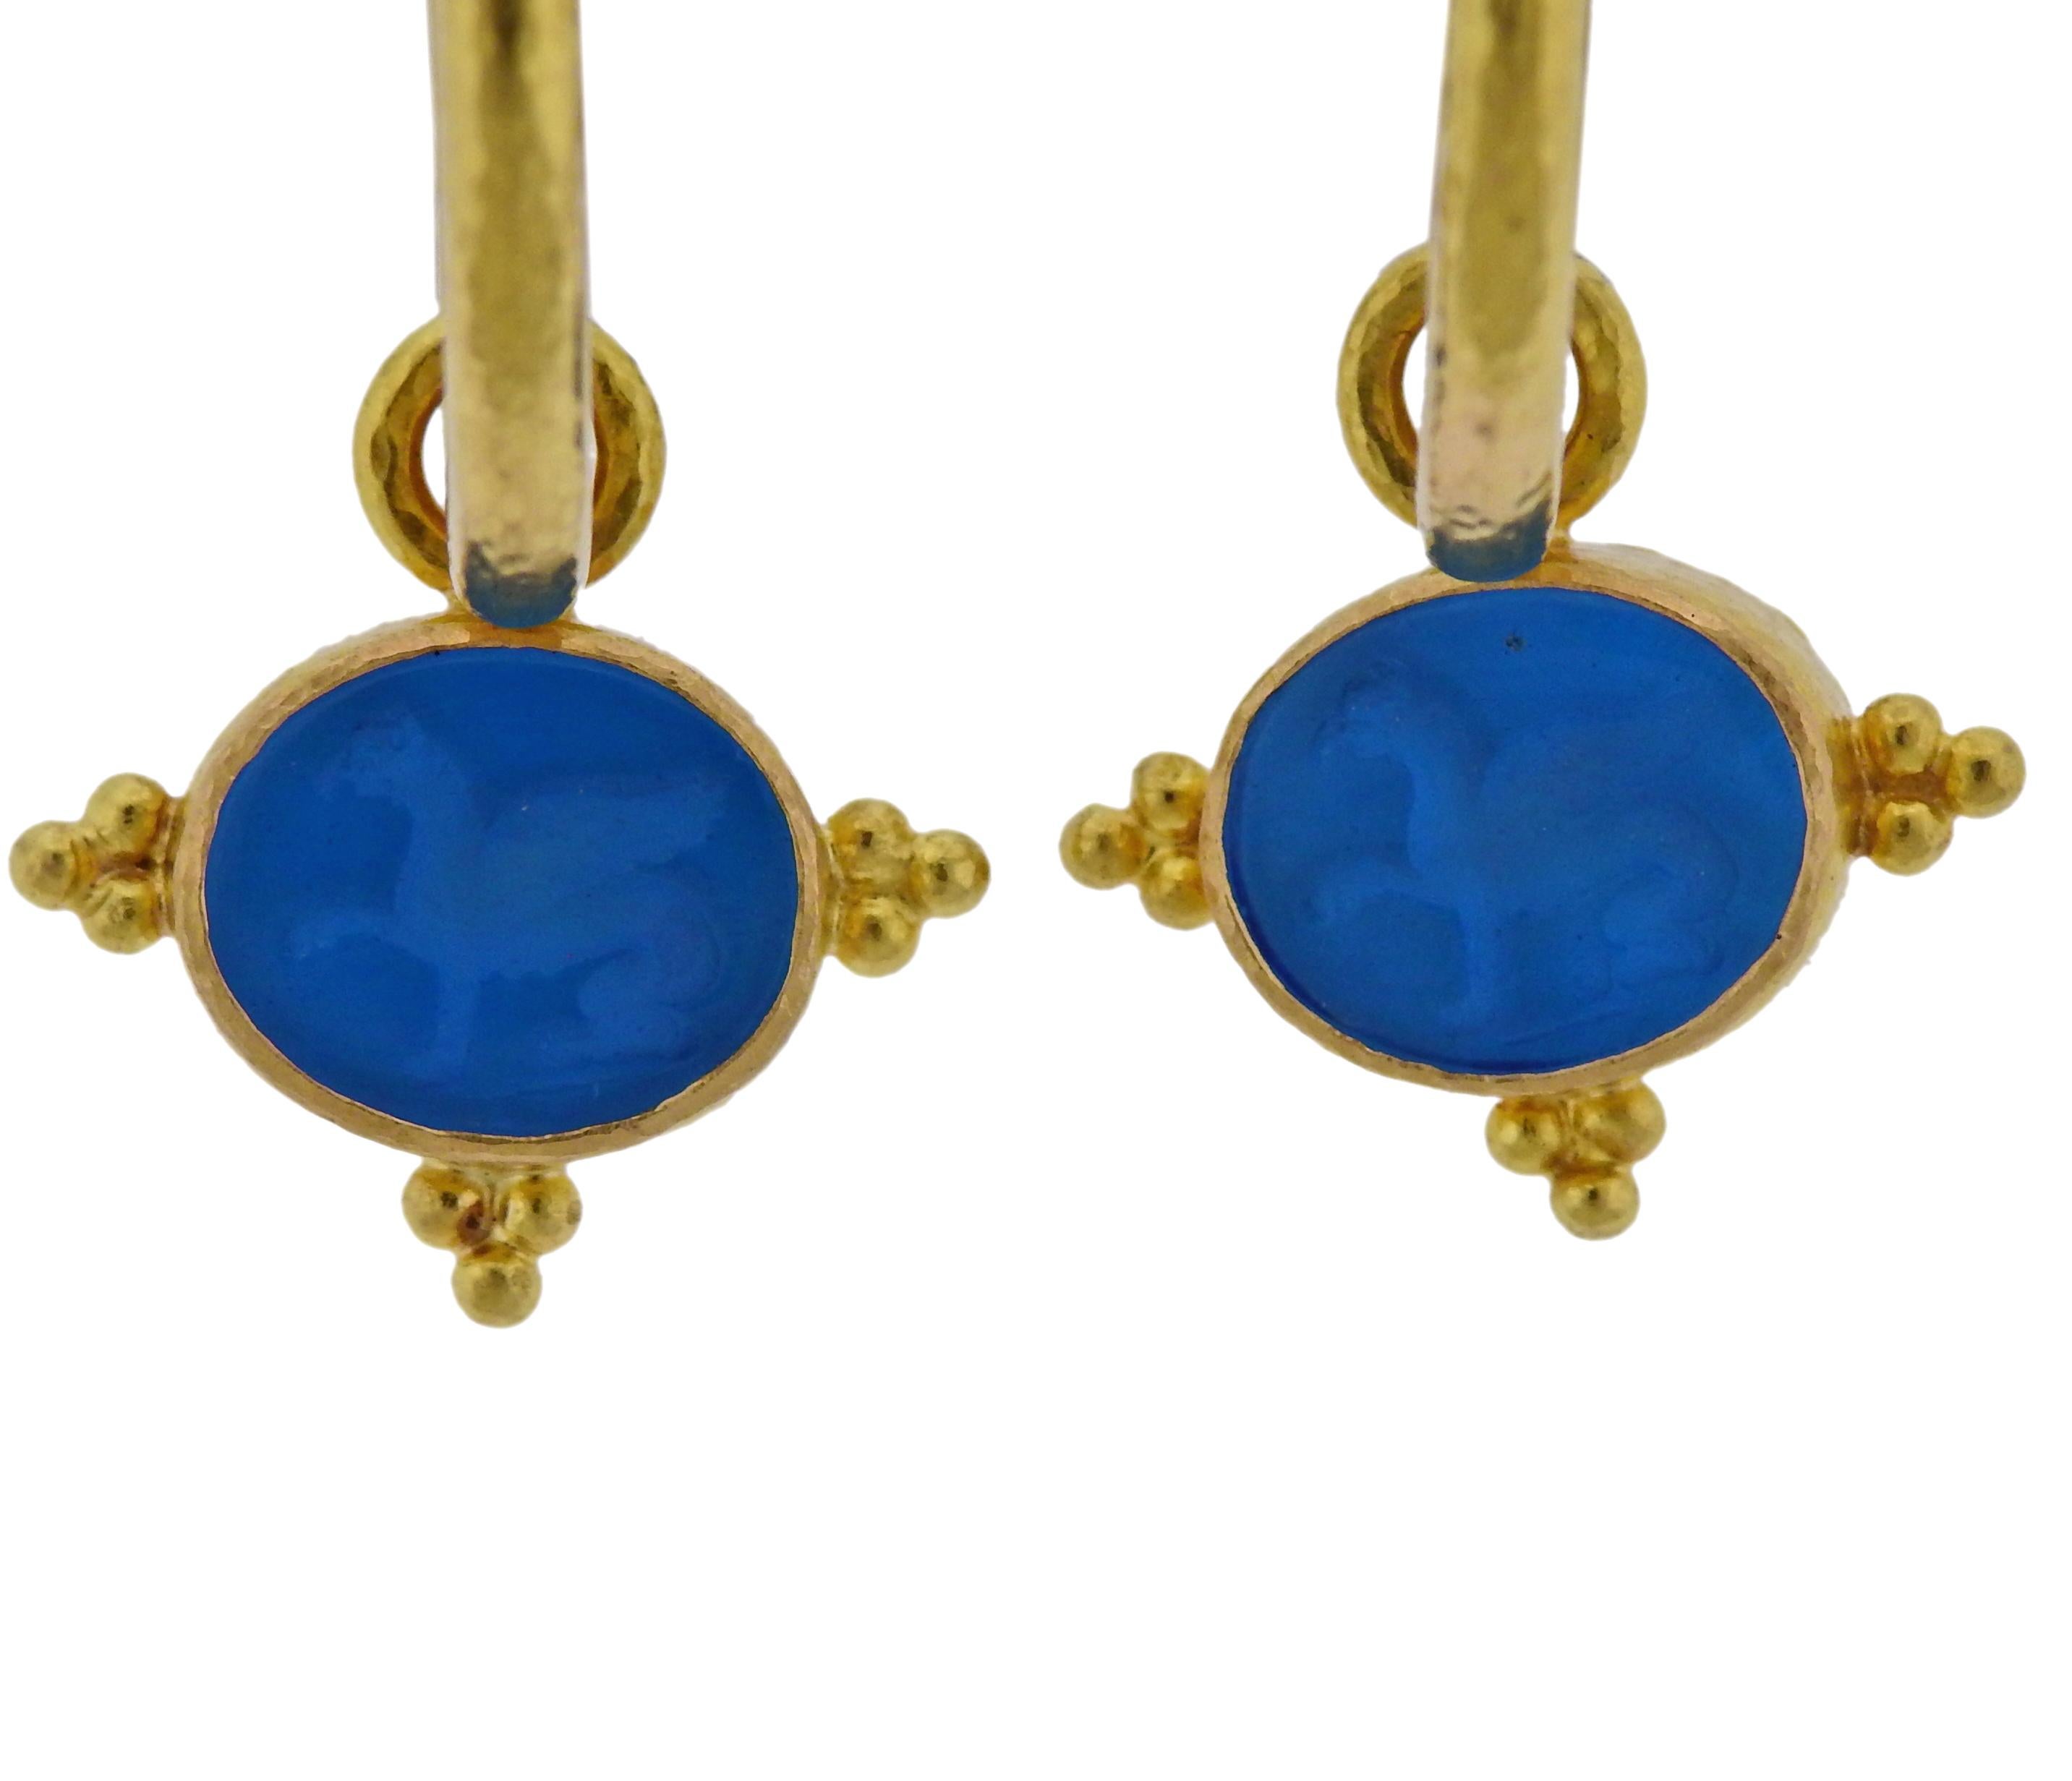 Pair of 19k yellow gold hoop earrings with removable drops, set with blue  Venetian glass intaglios, backed with mother of pearl. Designed by Elizabeth Locke. Approximate retail for hoops only $1850, pendants only - $1700. Earrings are 35mm long,